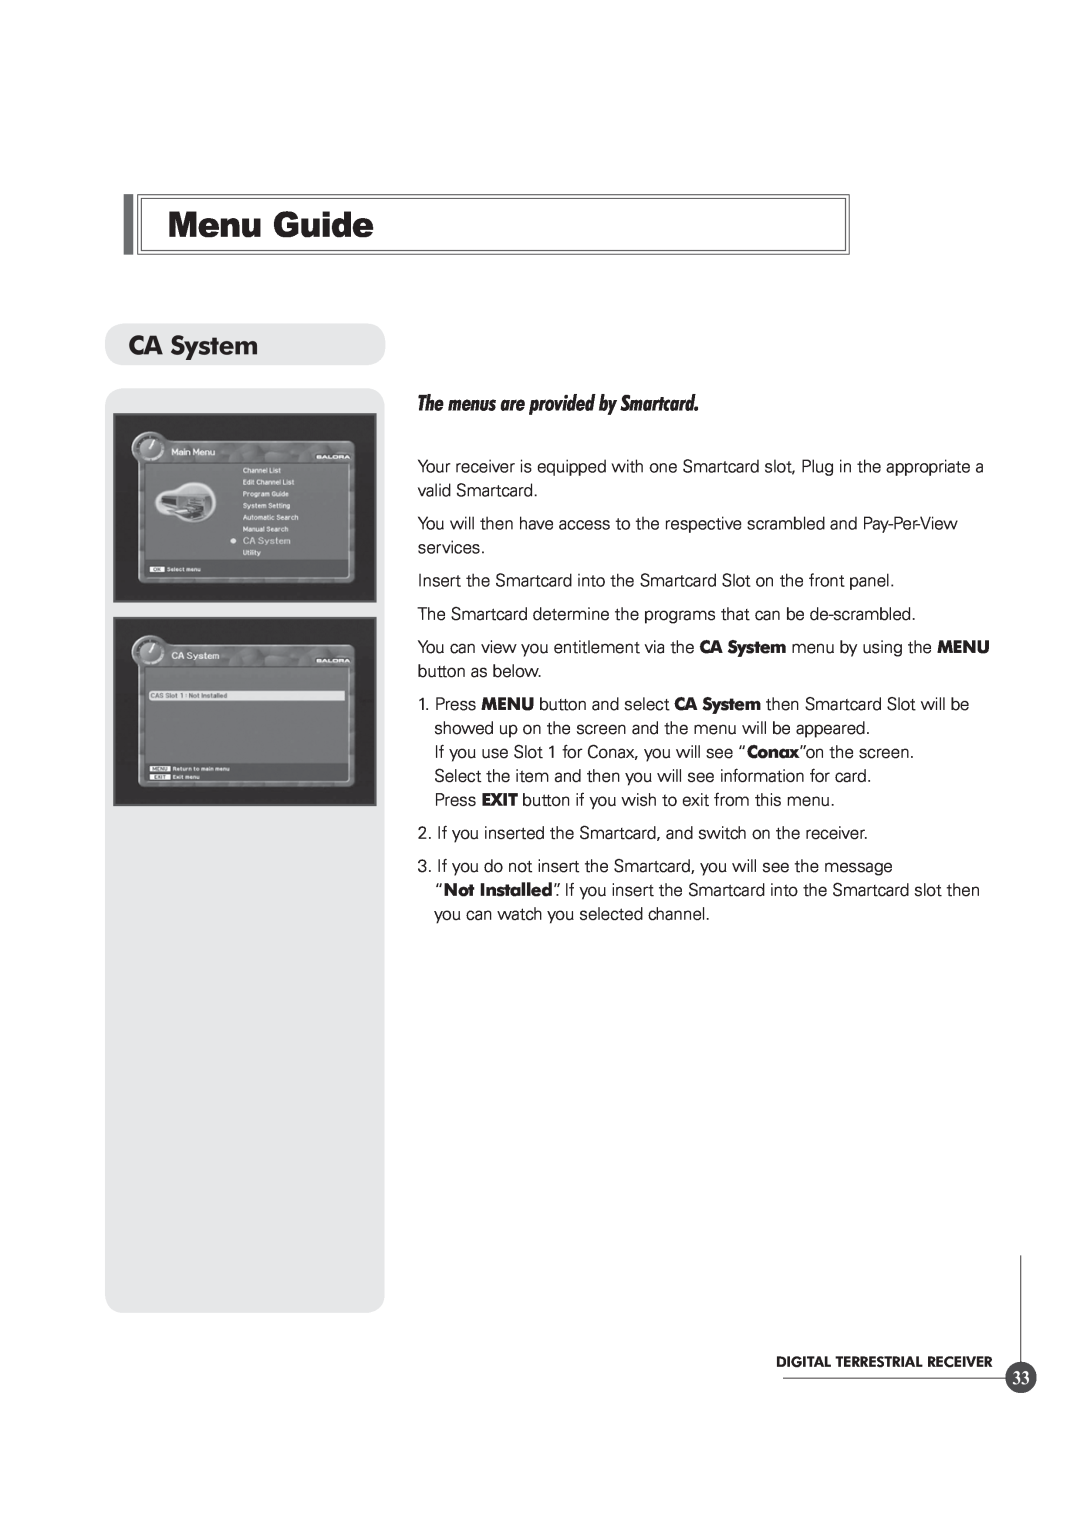 Triax TR 305 manual CA System, The menus are provided by Smartcard, Menu Guide 